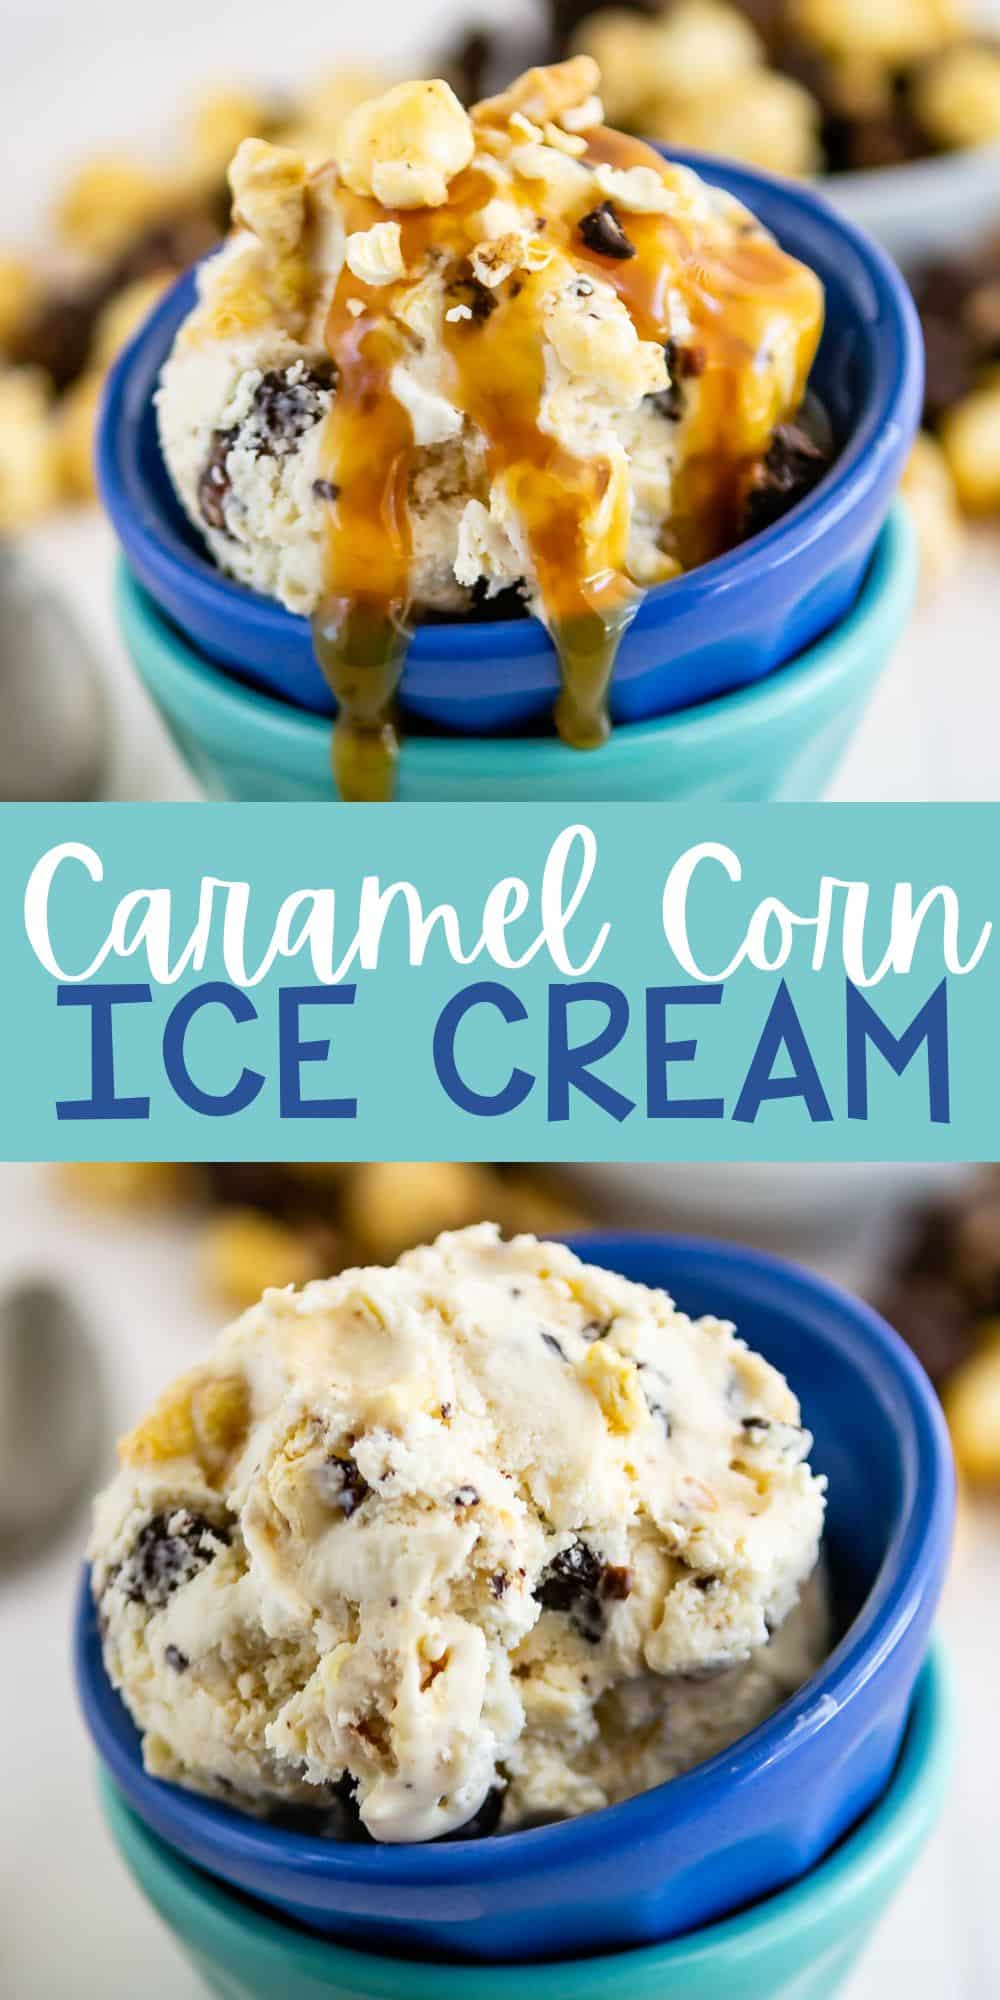 two photos of stacked blue bowls with ice cream in the bowls topped with caramel with words on the image.